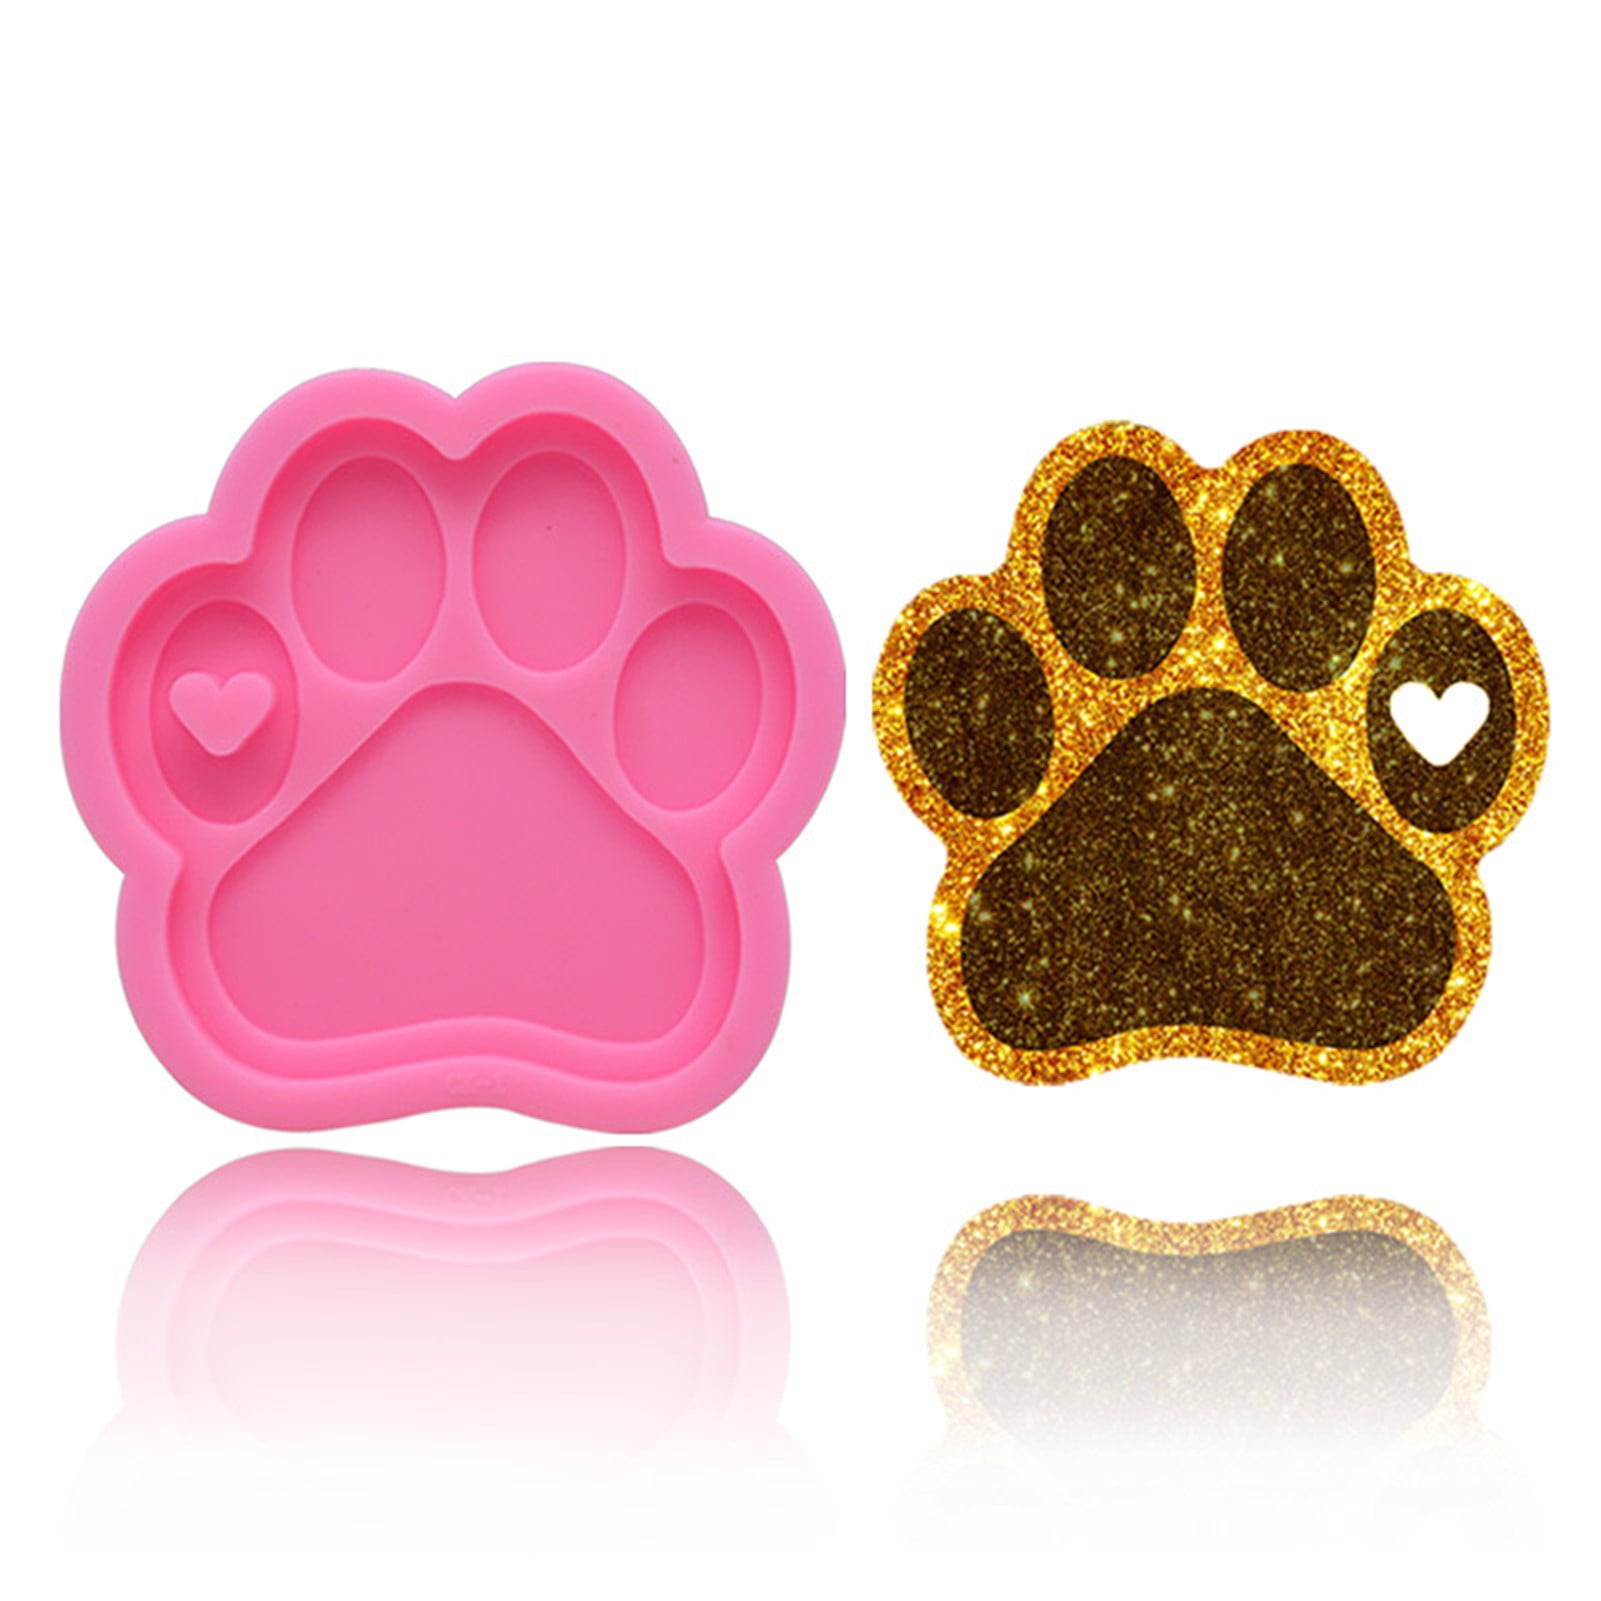 4 PCS Resin Keychain Molds, AFUNTA Milk Tea Cup Silicone Mold Heart-Shaped  Paw Print Resin Molds Silicone with 10 Key Rings, for DIY Keychain Pendant